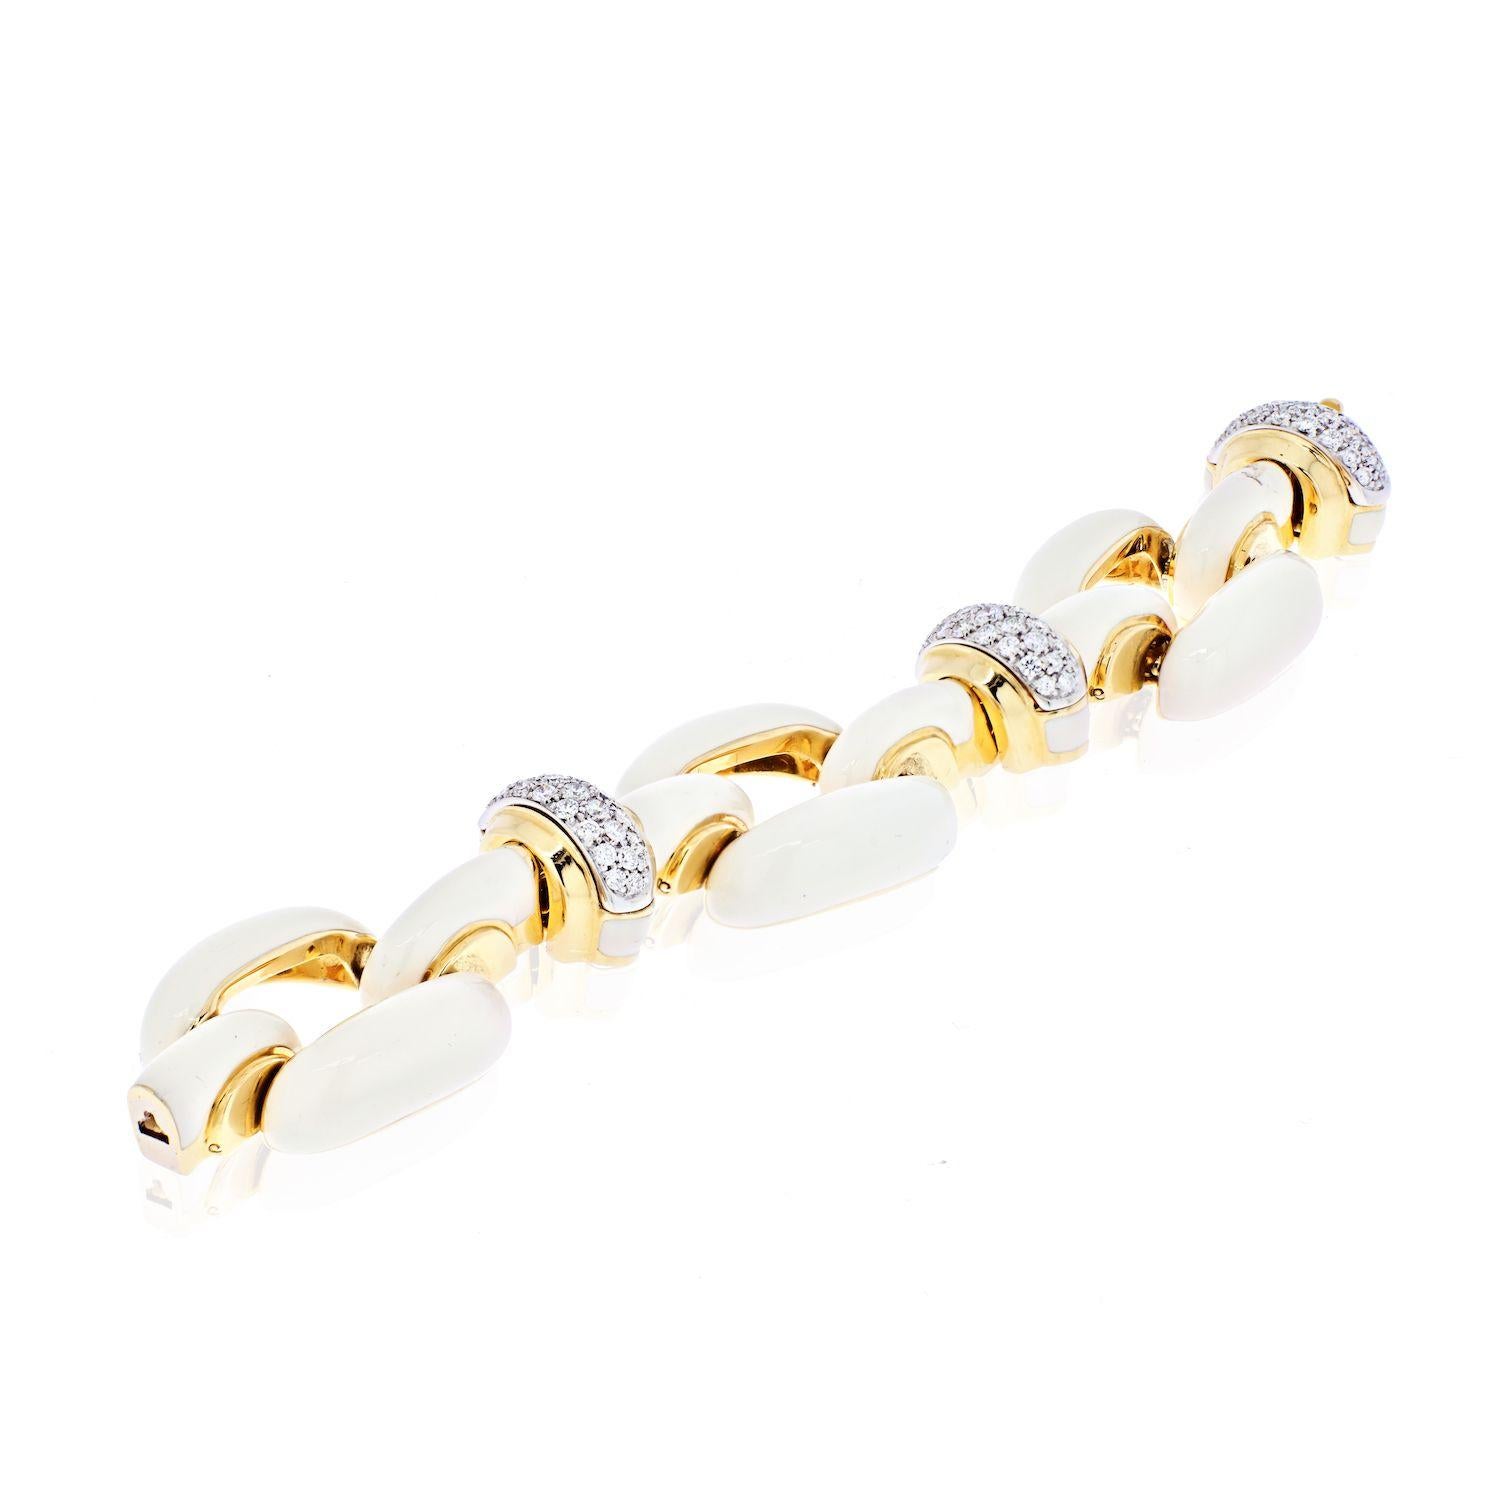 Circa 1975, chucky link bracelet by David Webb is so timelessly designed that it looks perfectly current and stylishly modern. Classic yet very fashion forward, the oversized 18K yellow gold links are enameled in a bright white and intersected with